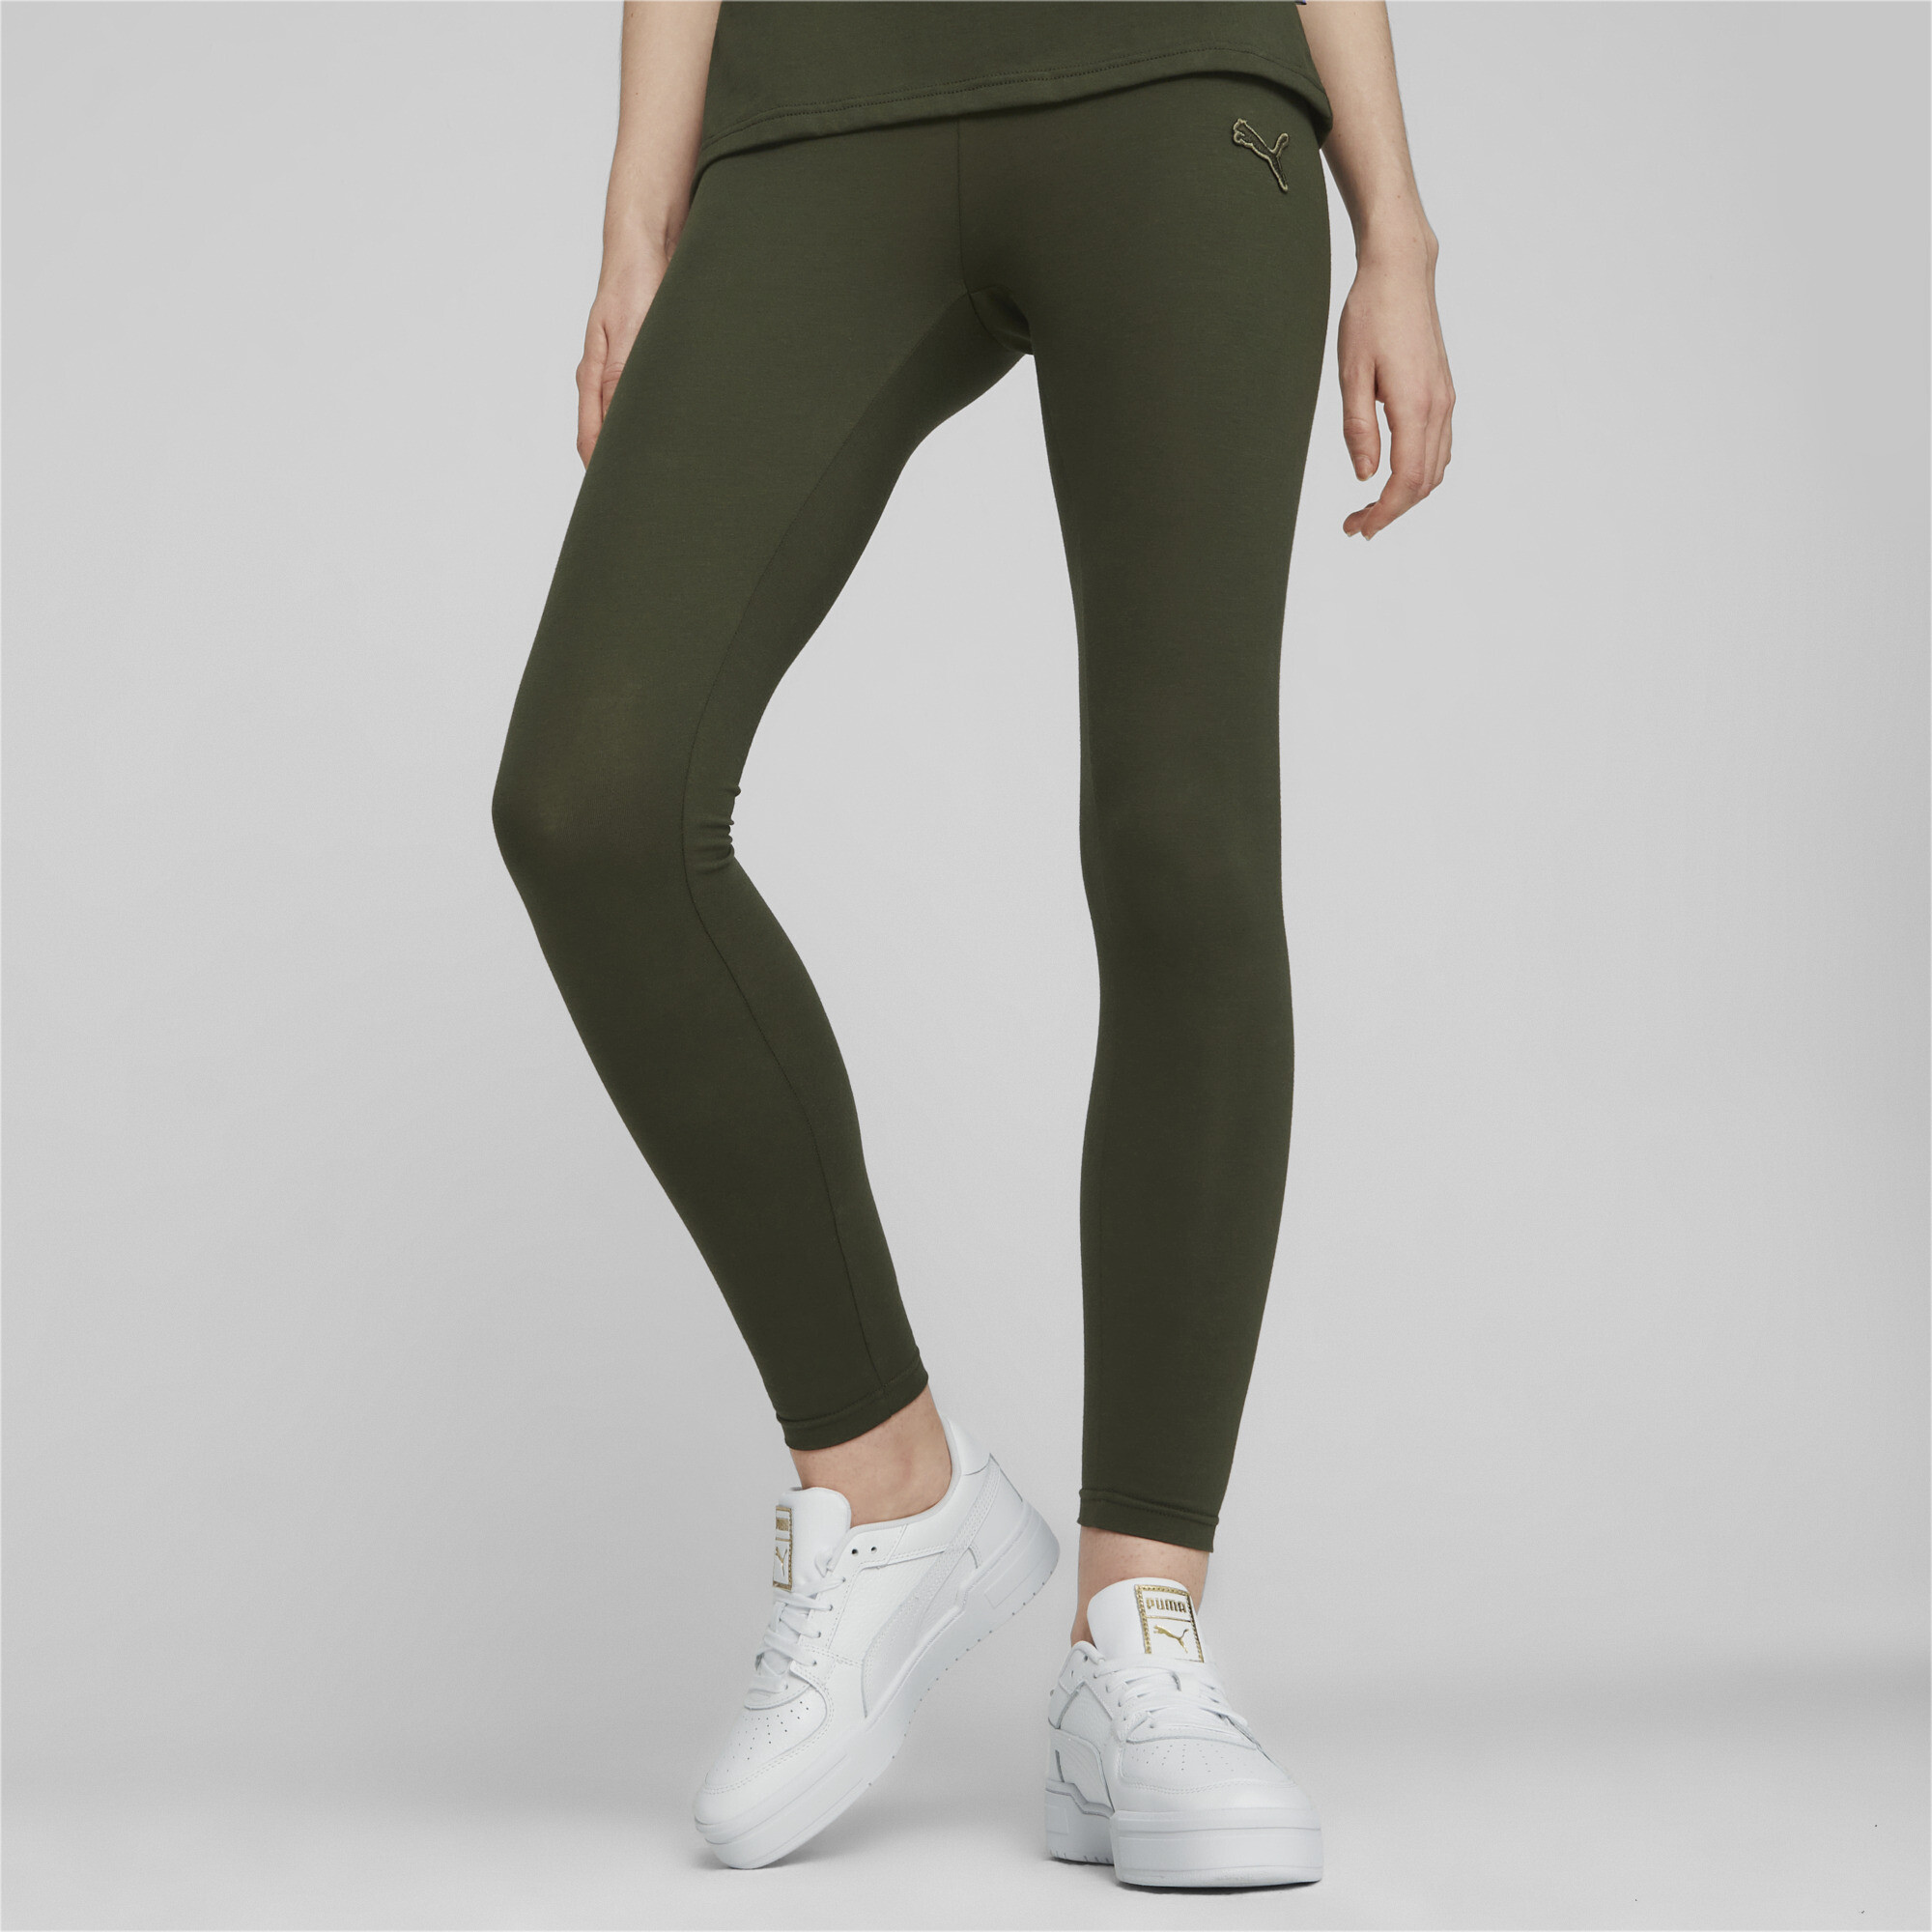 Women's Puma Made In France Leggings, Green, Size XS, Clothing